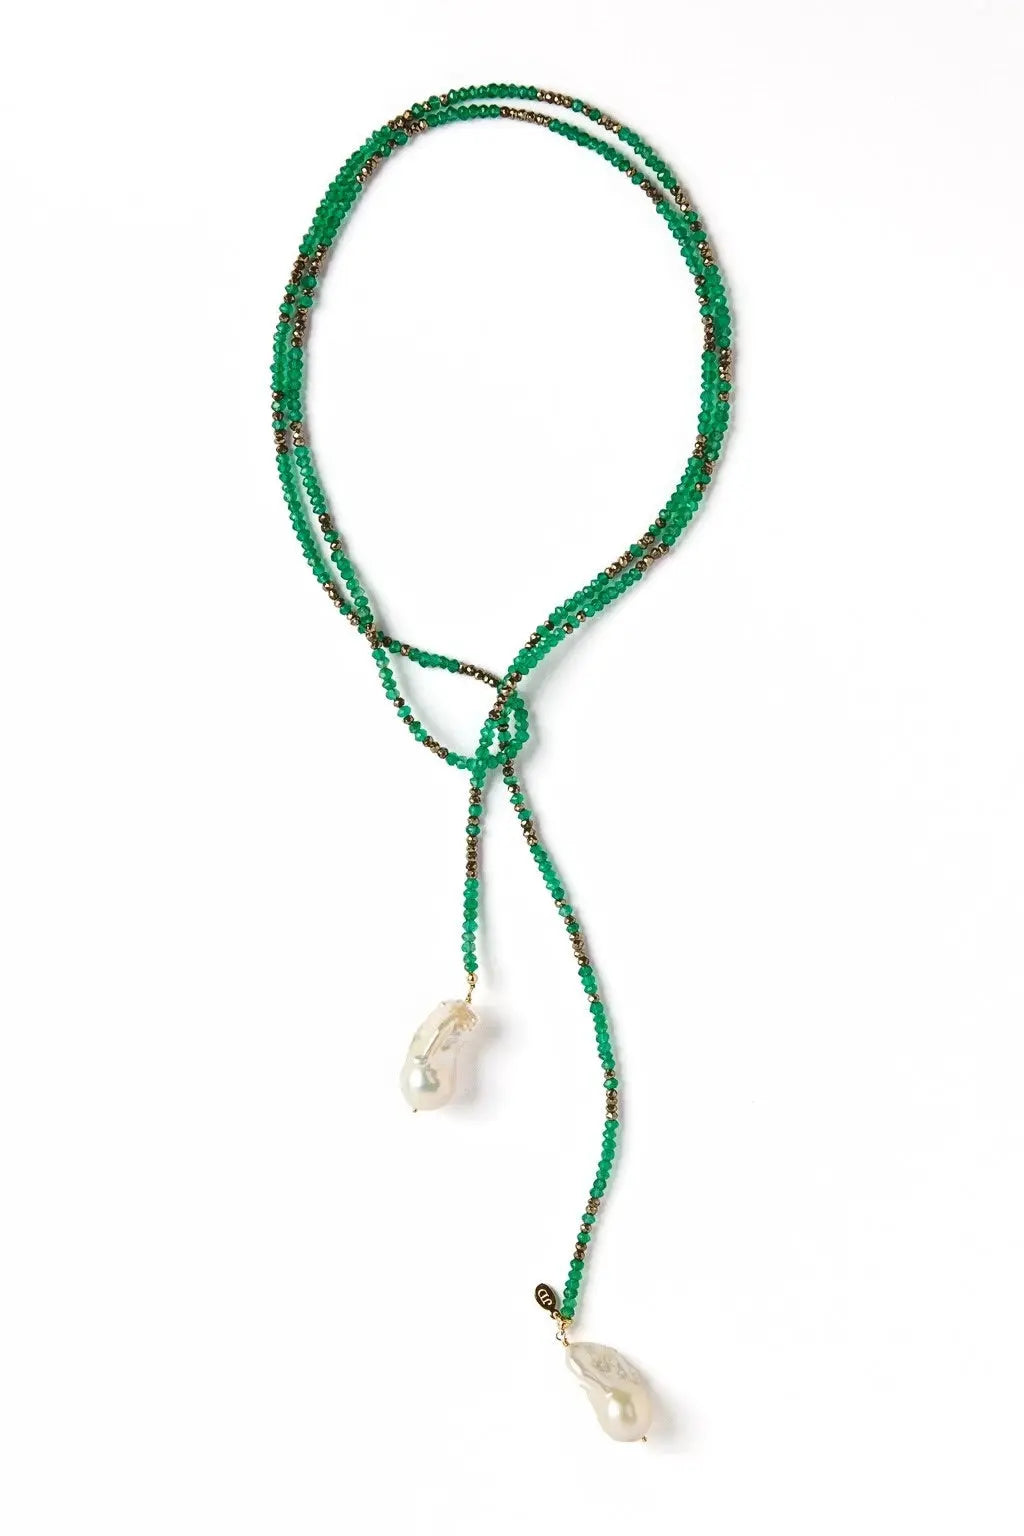 Green Onyx and Pyrite Ombre Classic Gemstone Lariat - Squash Blossom Vail